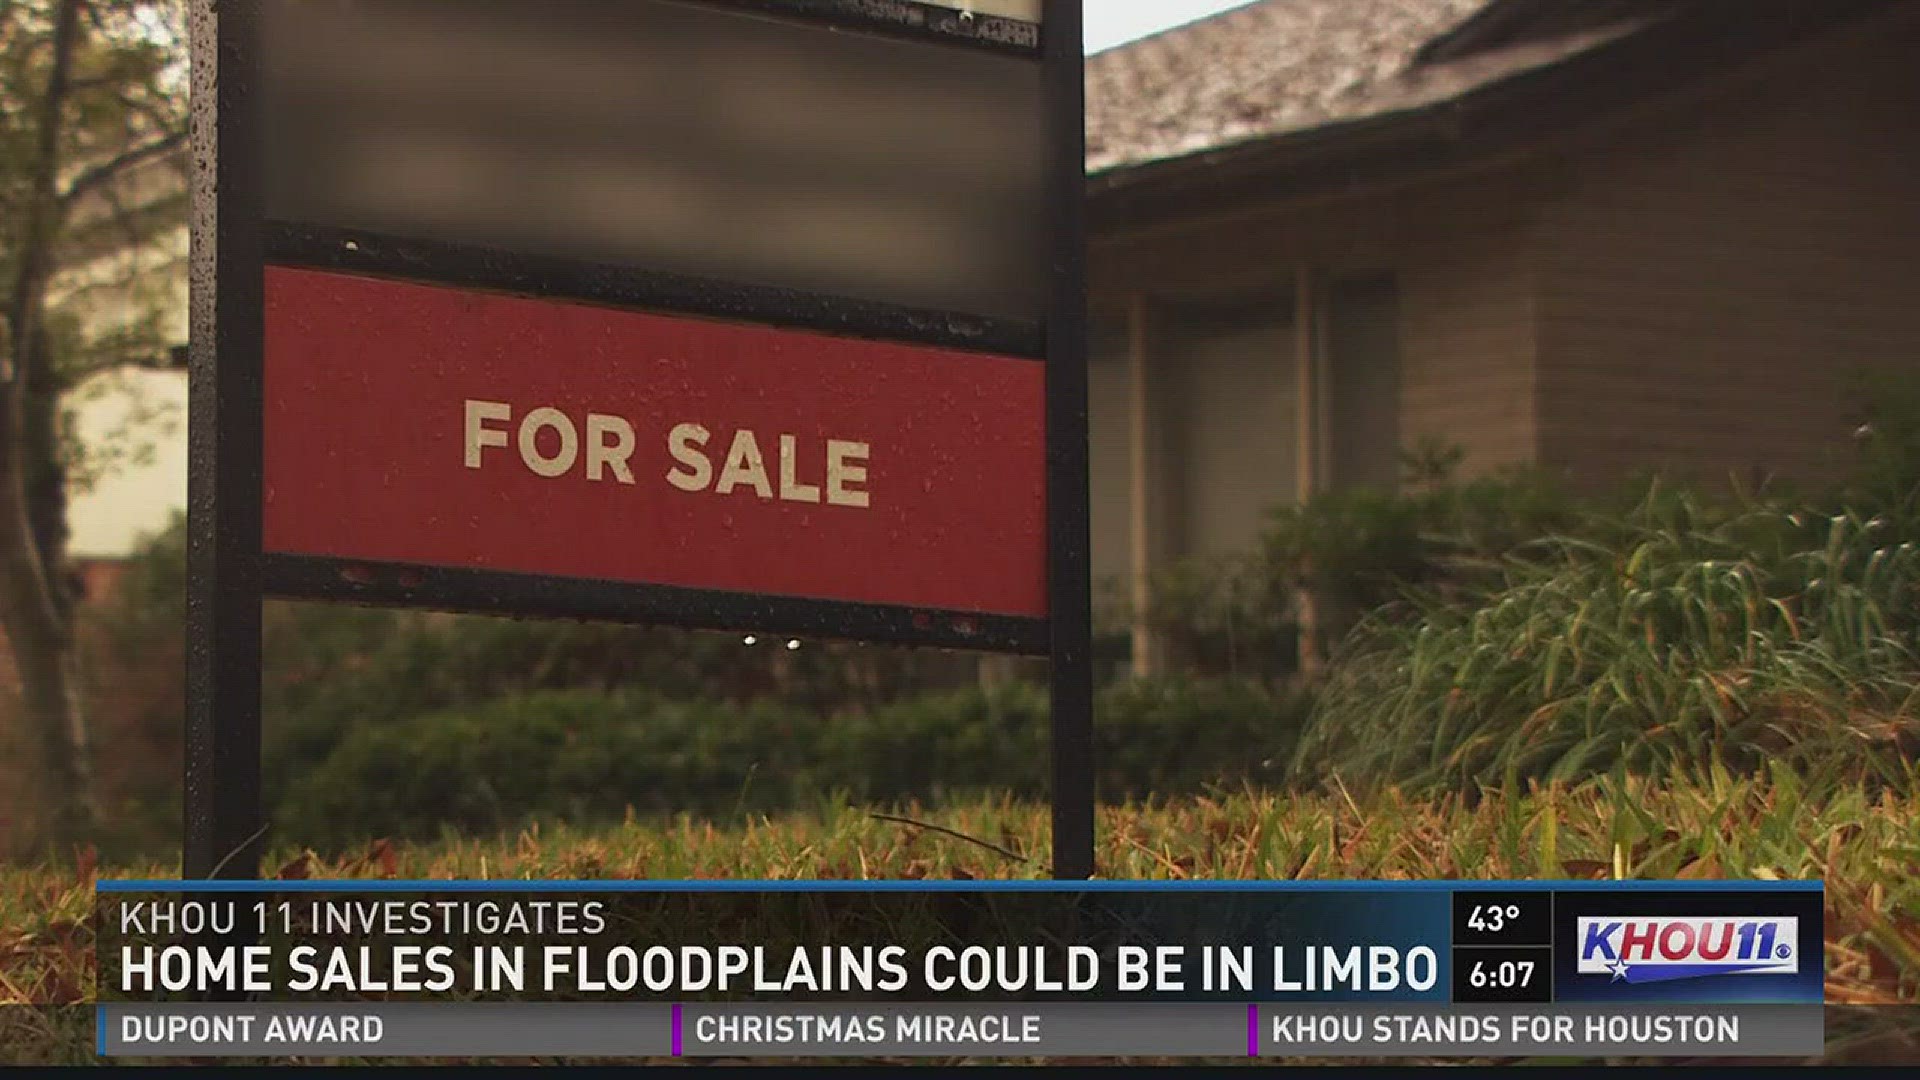 The clock is ticking toward a deadline that would impact thousands looking to buy or sell homes across the Houston area.